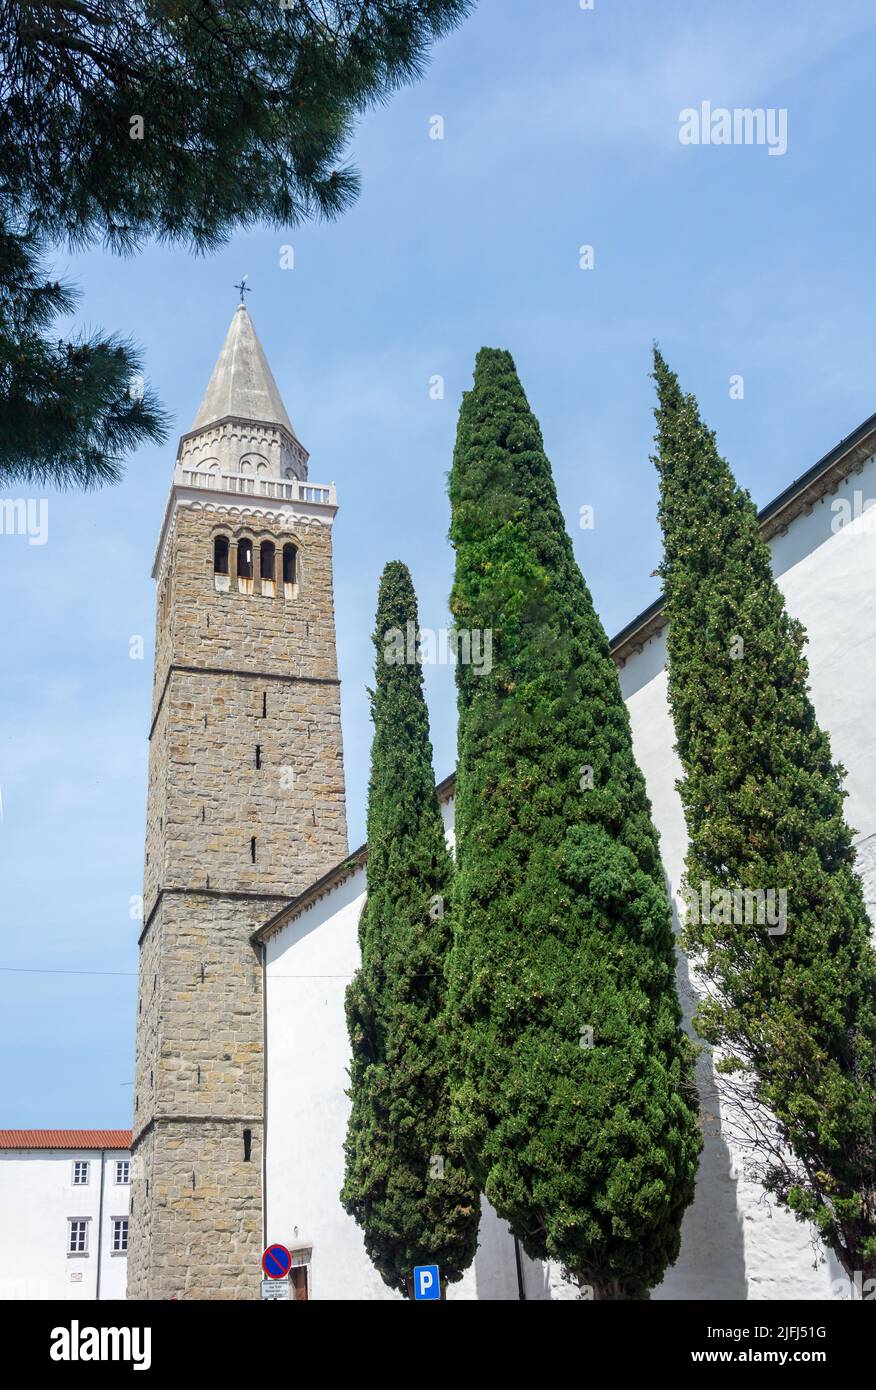 Cathedral of the Assumption bell tower, Trg Brolo, Koper, Slovene Istria, Slovenia Stock Photo